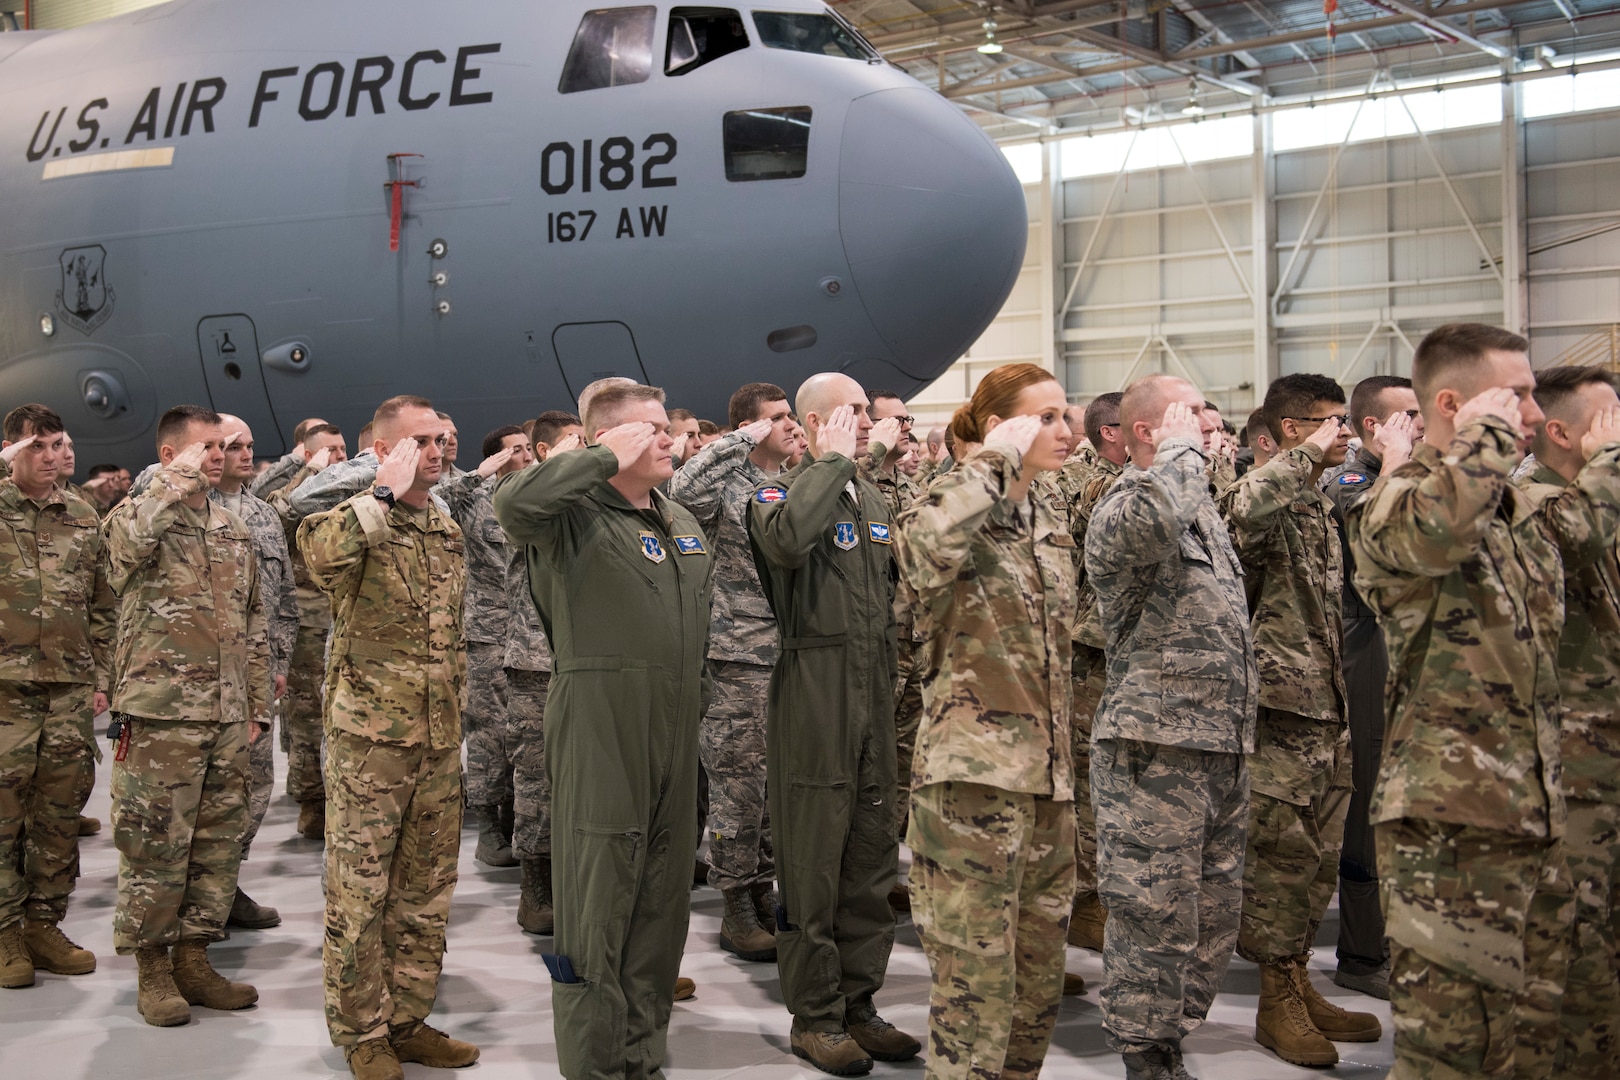 167th Airlift Wing Airmen salute their new commander during a change of command ceremony held in an aircraft hangar, Jan. 12, 2020. Col. Martin Timko assumed command of the wing, Col. David Cochran relinquished command during the ceremony.